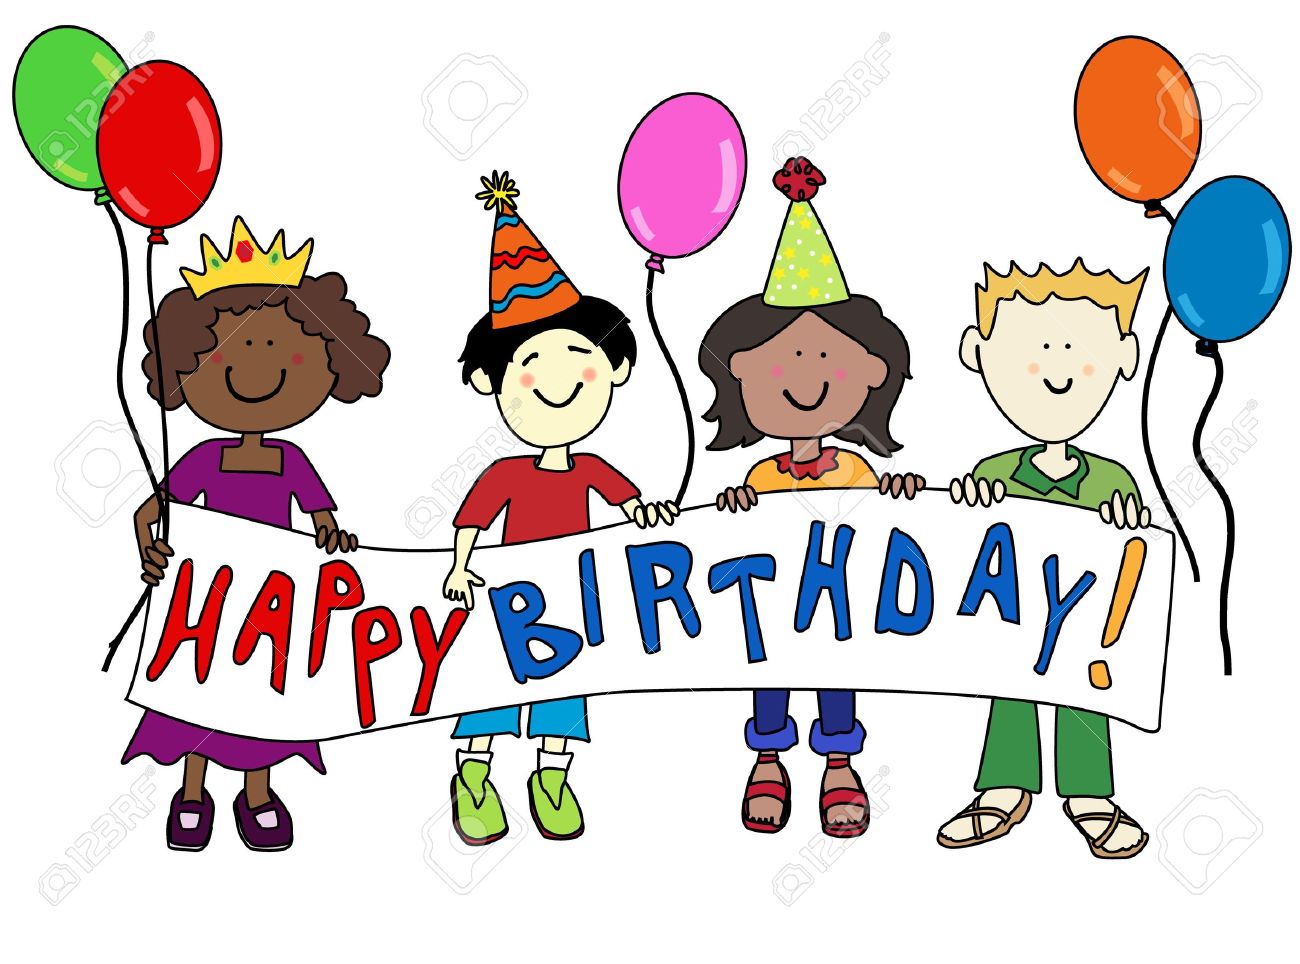 Happy Birthday Cartoon Images | Free download on ClipArtMag